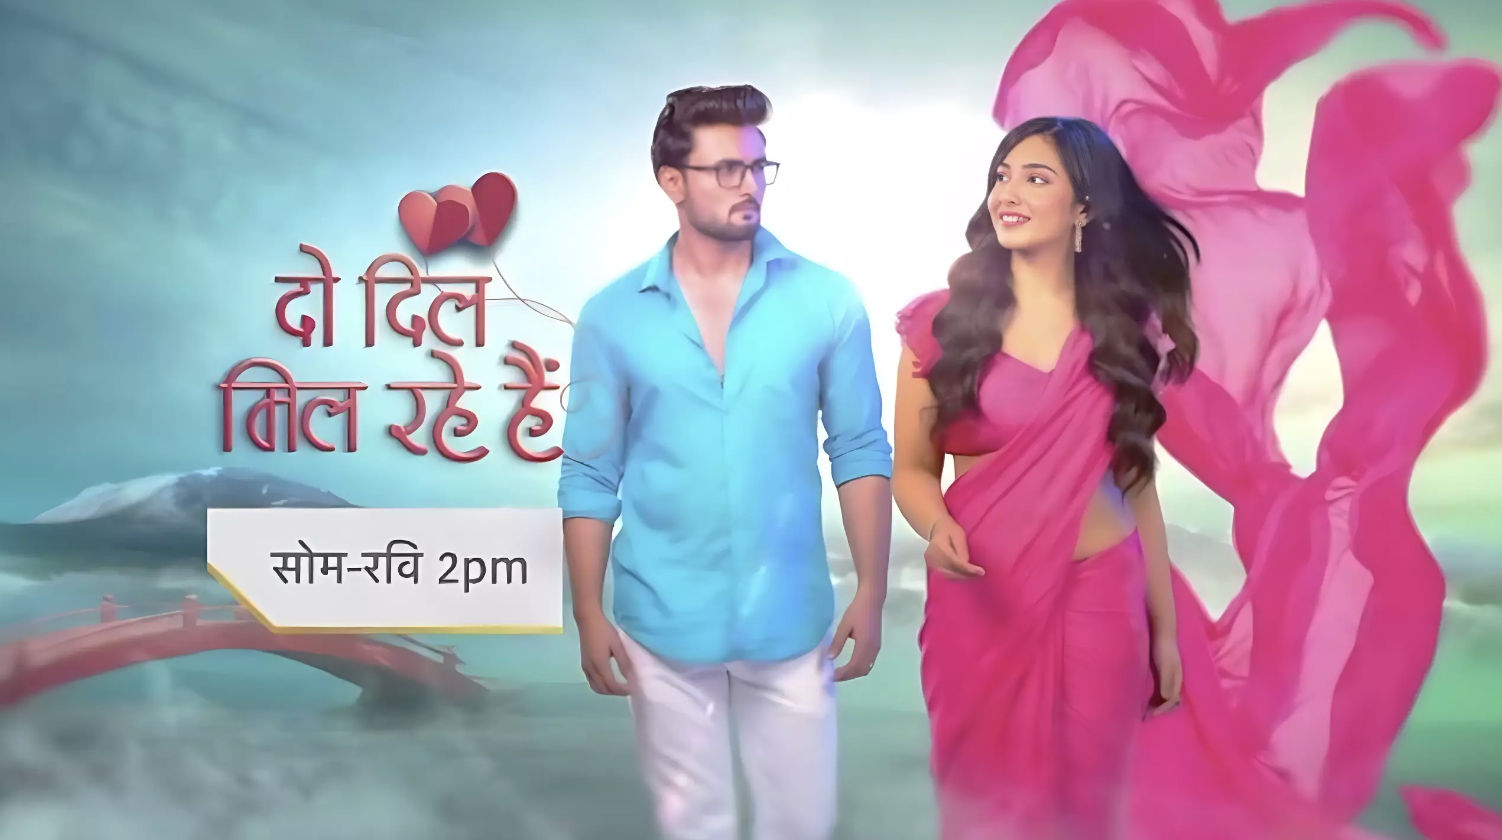 Do Dil Mil Rahe Hain Star Plus Serial Cast, Actors and Actress Real Name, Starting Date, Time, Story